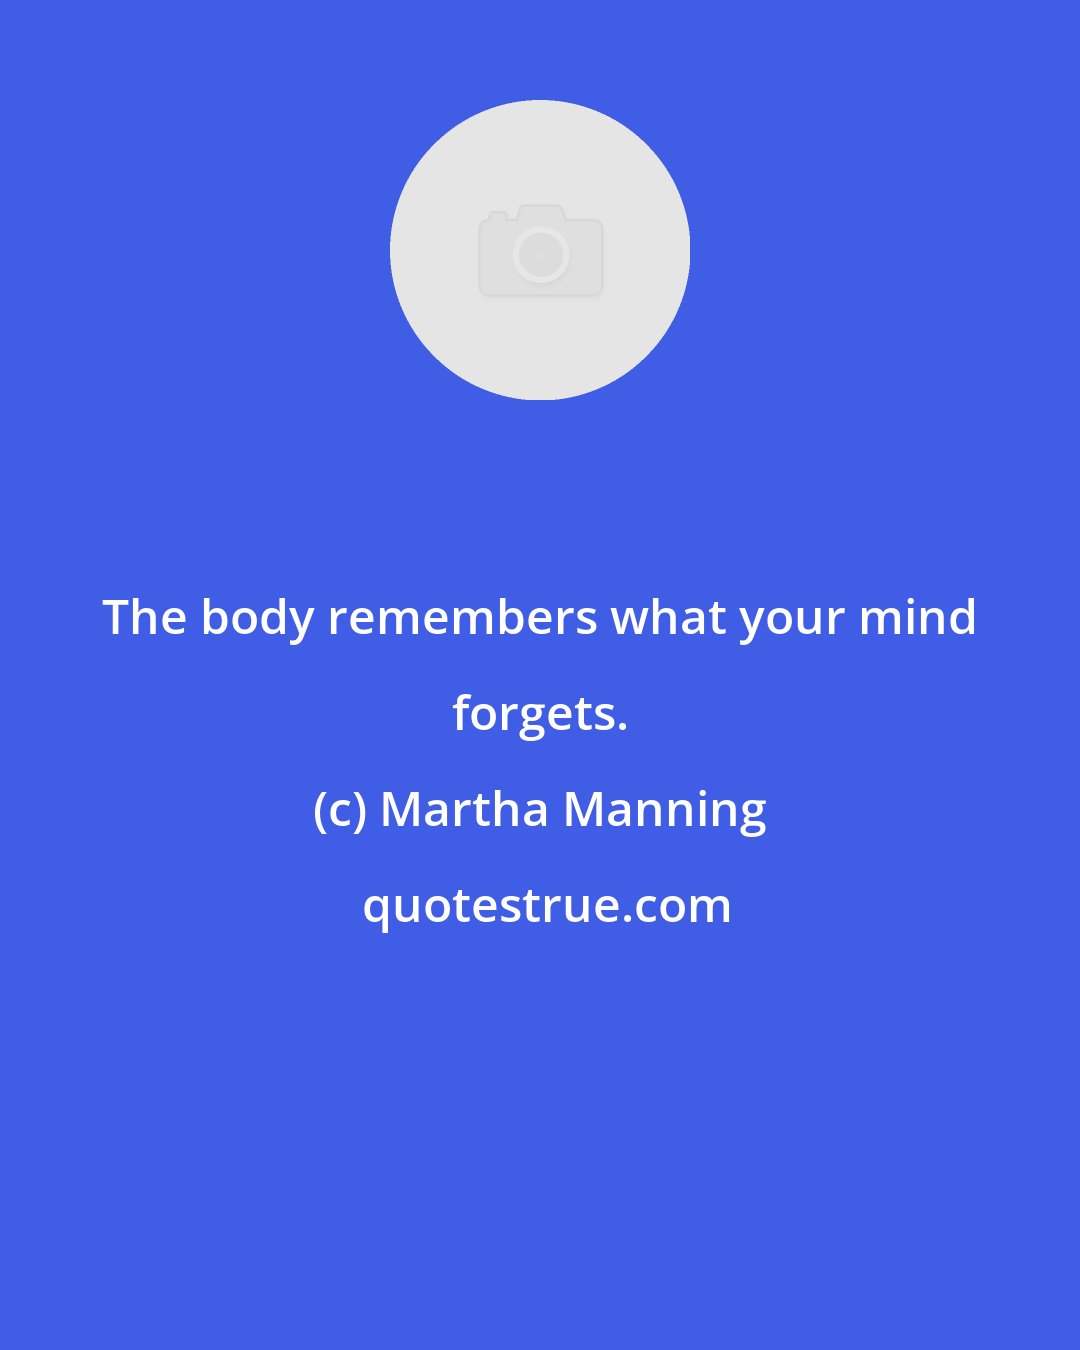 Martha Manning: The body remembers what your mind forgets.